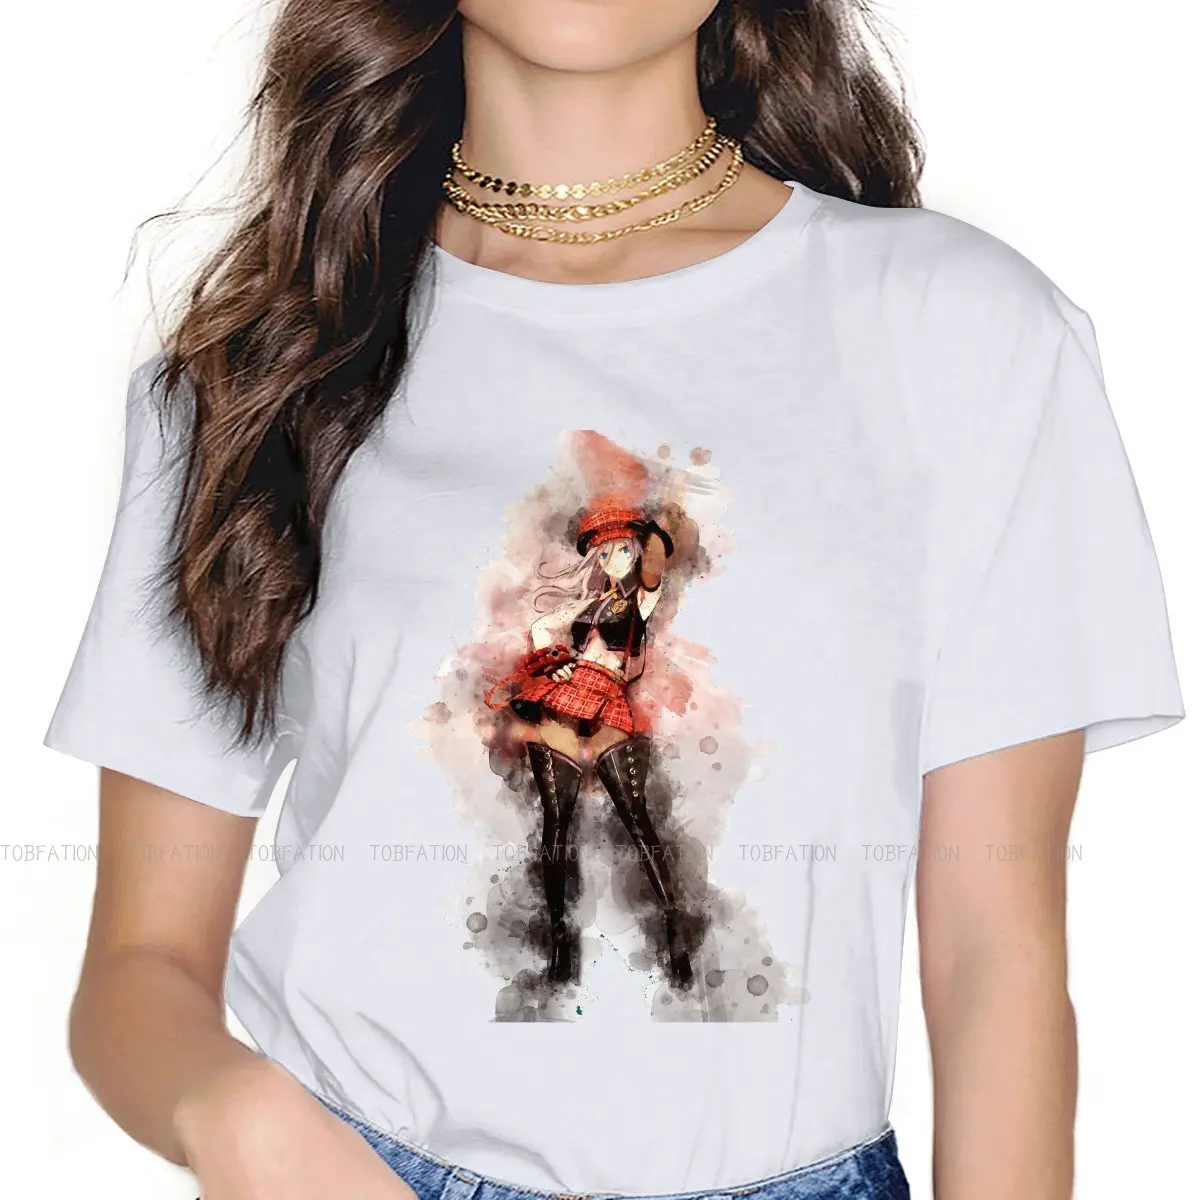 

God Eater Game Anime Original TShirts Alisa Watercolor Essential Print Homme T Shirt Hipster Tops